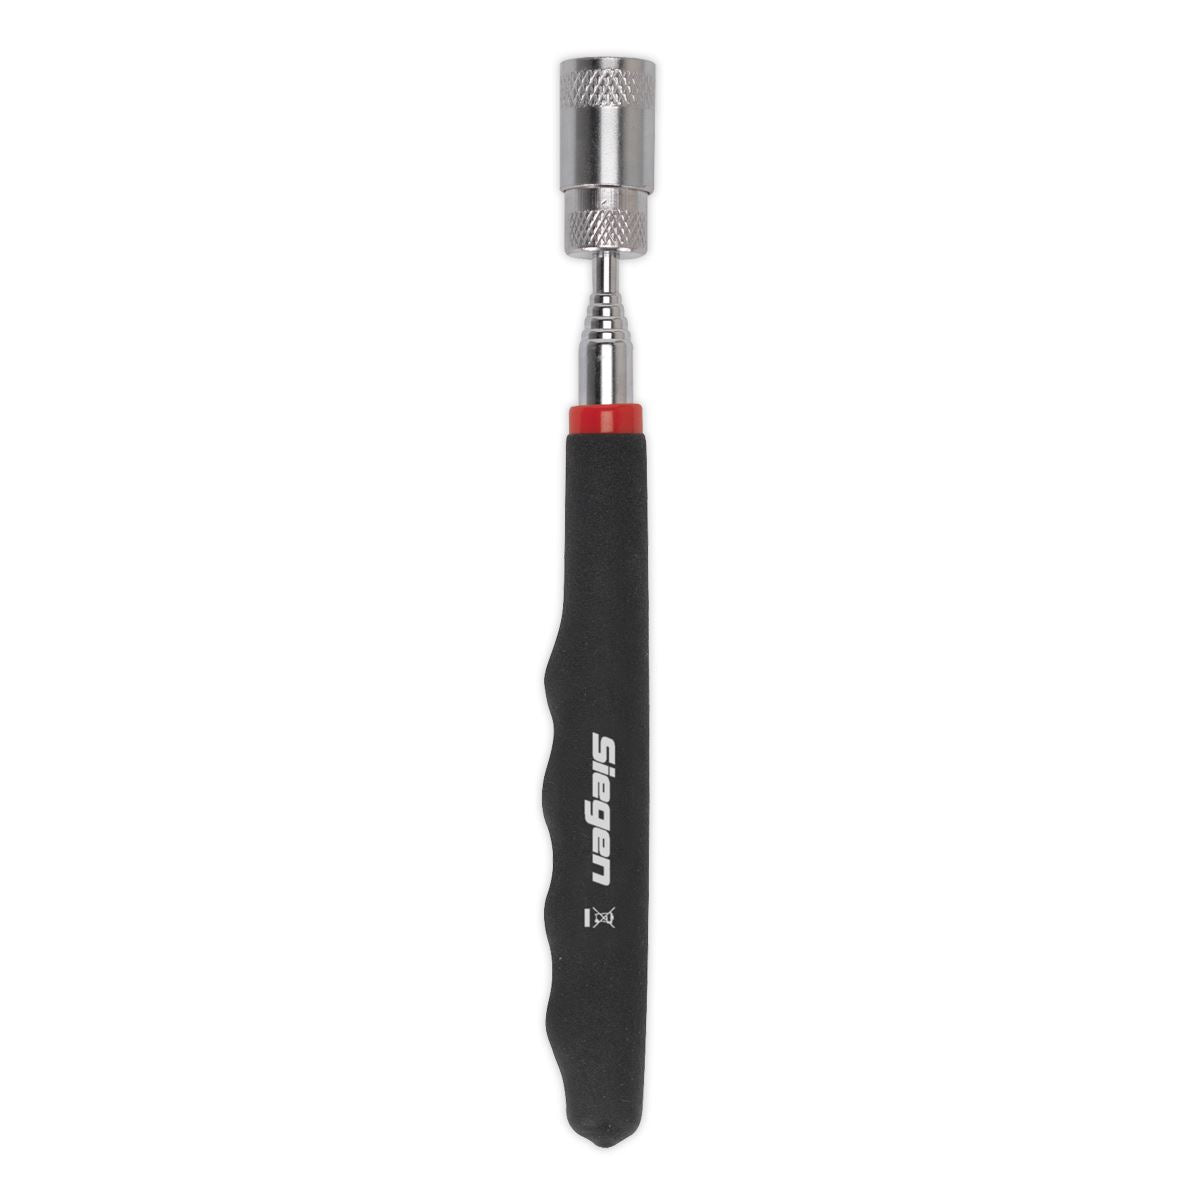 Siegen by Sealey Heavy-Duty Magnetic Pick-Up Tool with LED 3.6kg Capacity Display Box of 16